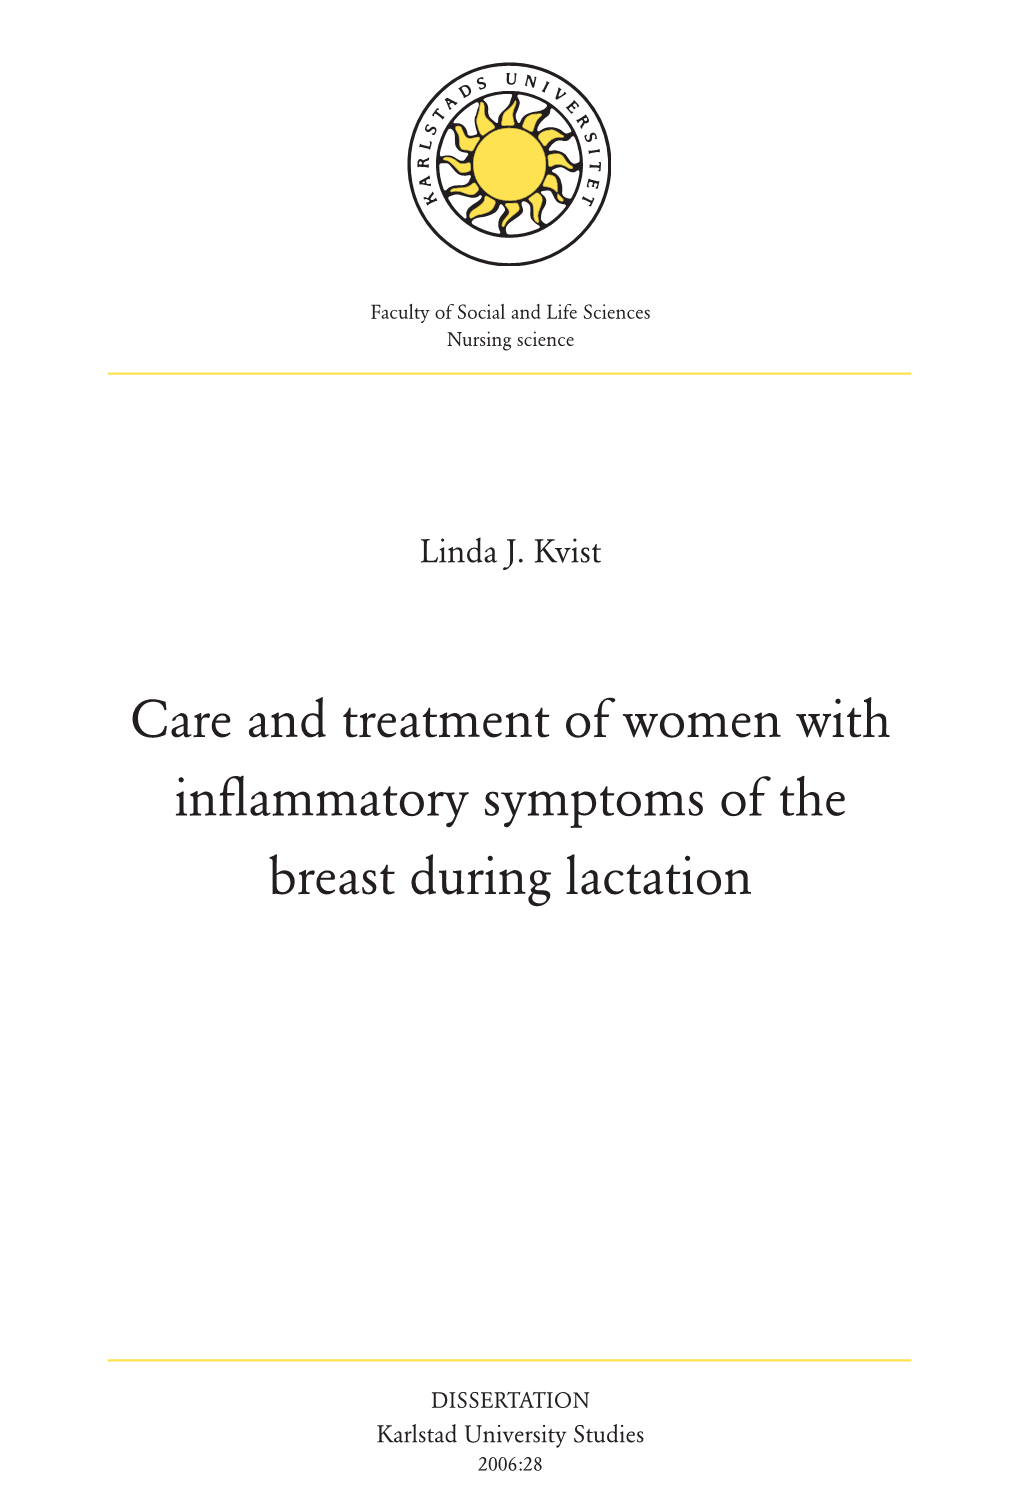 Care and Treatment of Women with Inflammatory Symptoms of the Breast During Lactation Faculty of Social and Life Sciences Nursing Science